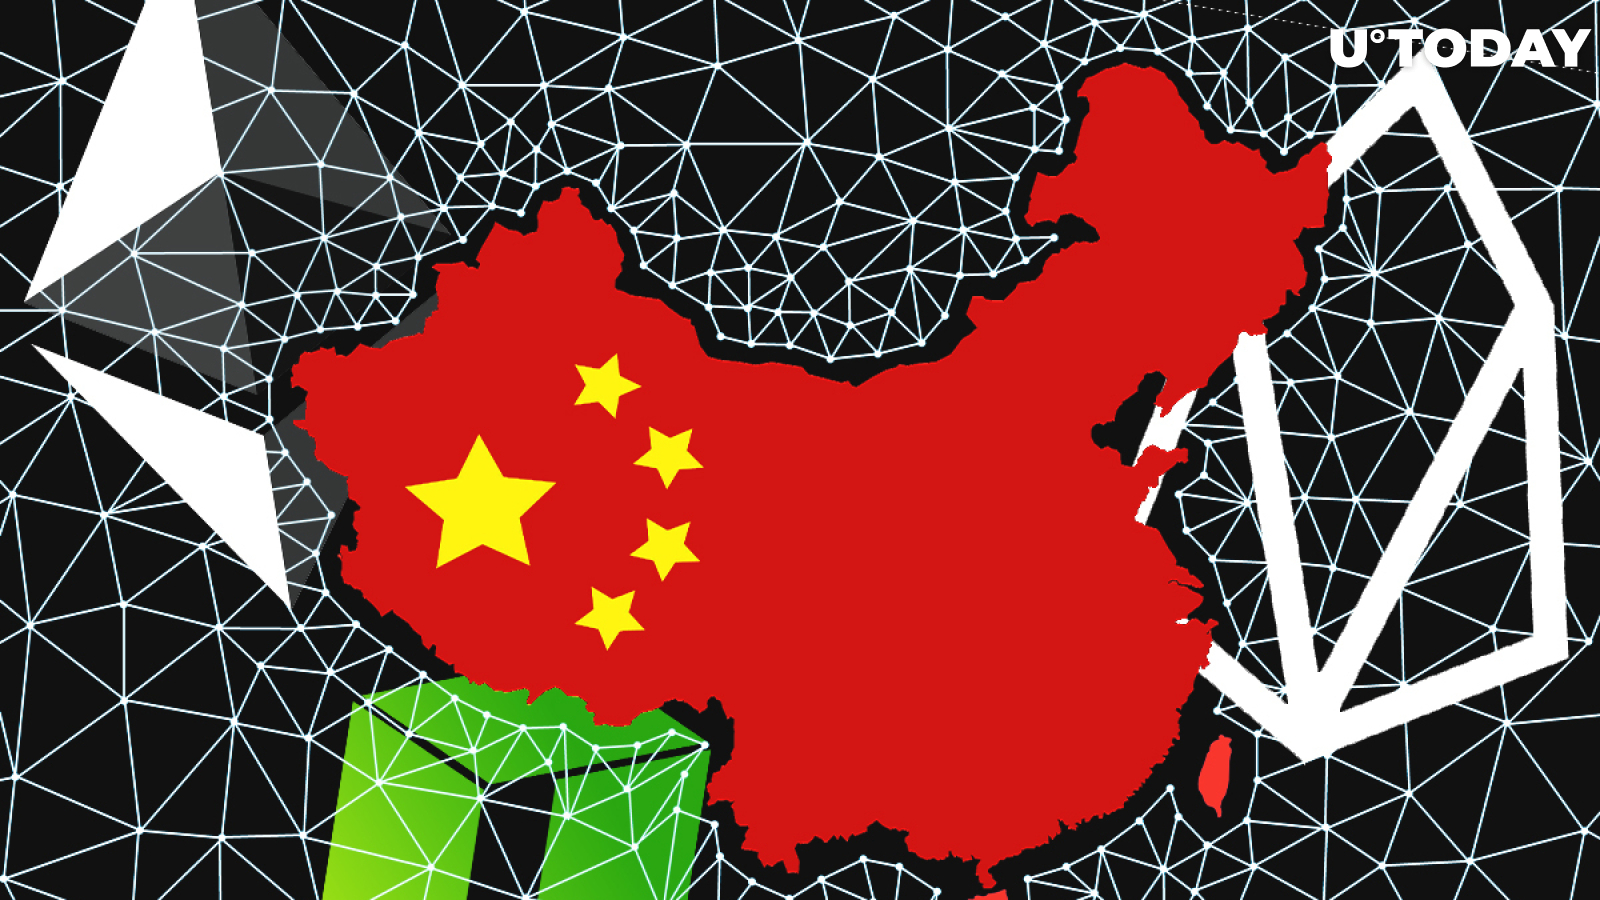 After Integrating Ethereum, EOS, and NEO, China’s Blockchain Infrastructure Plans to Add Up to 100 Public Chains 